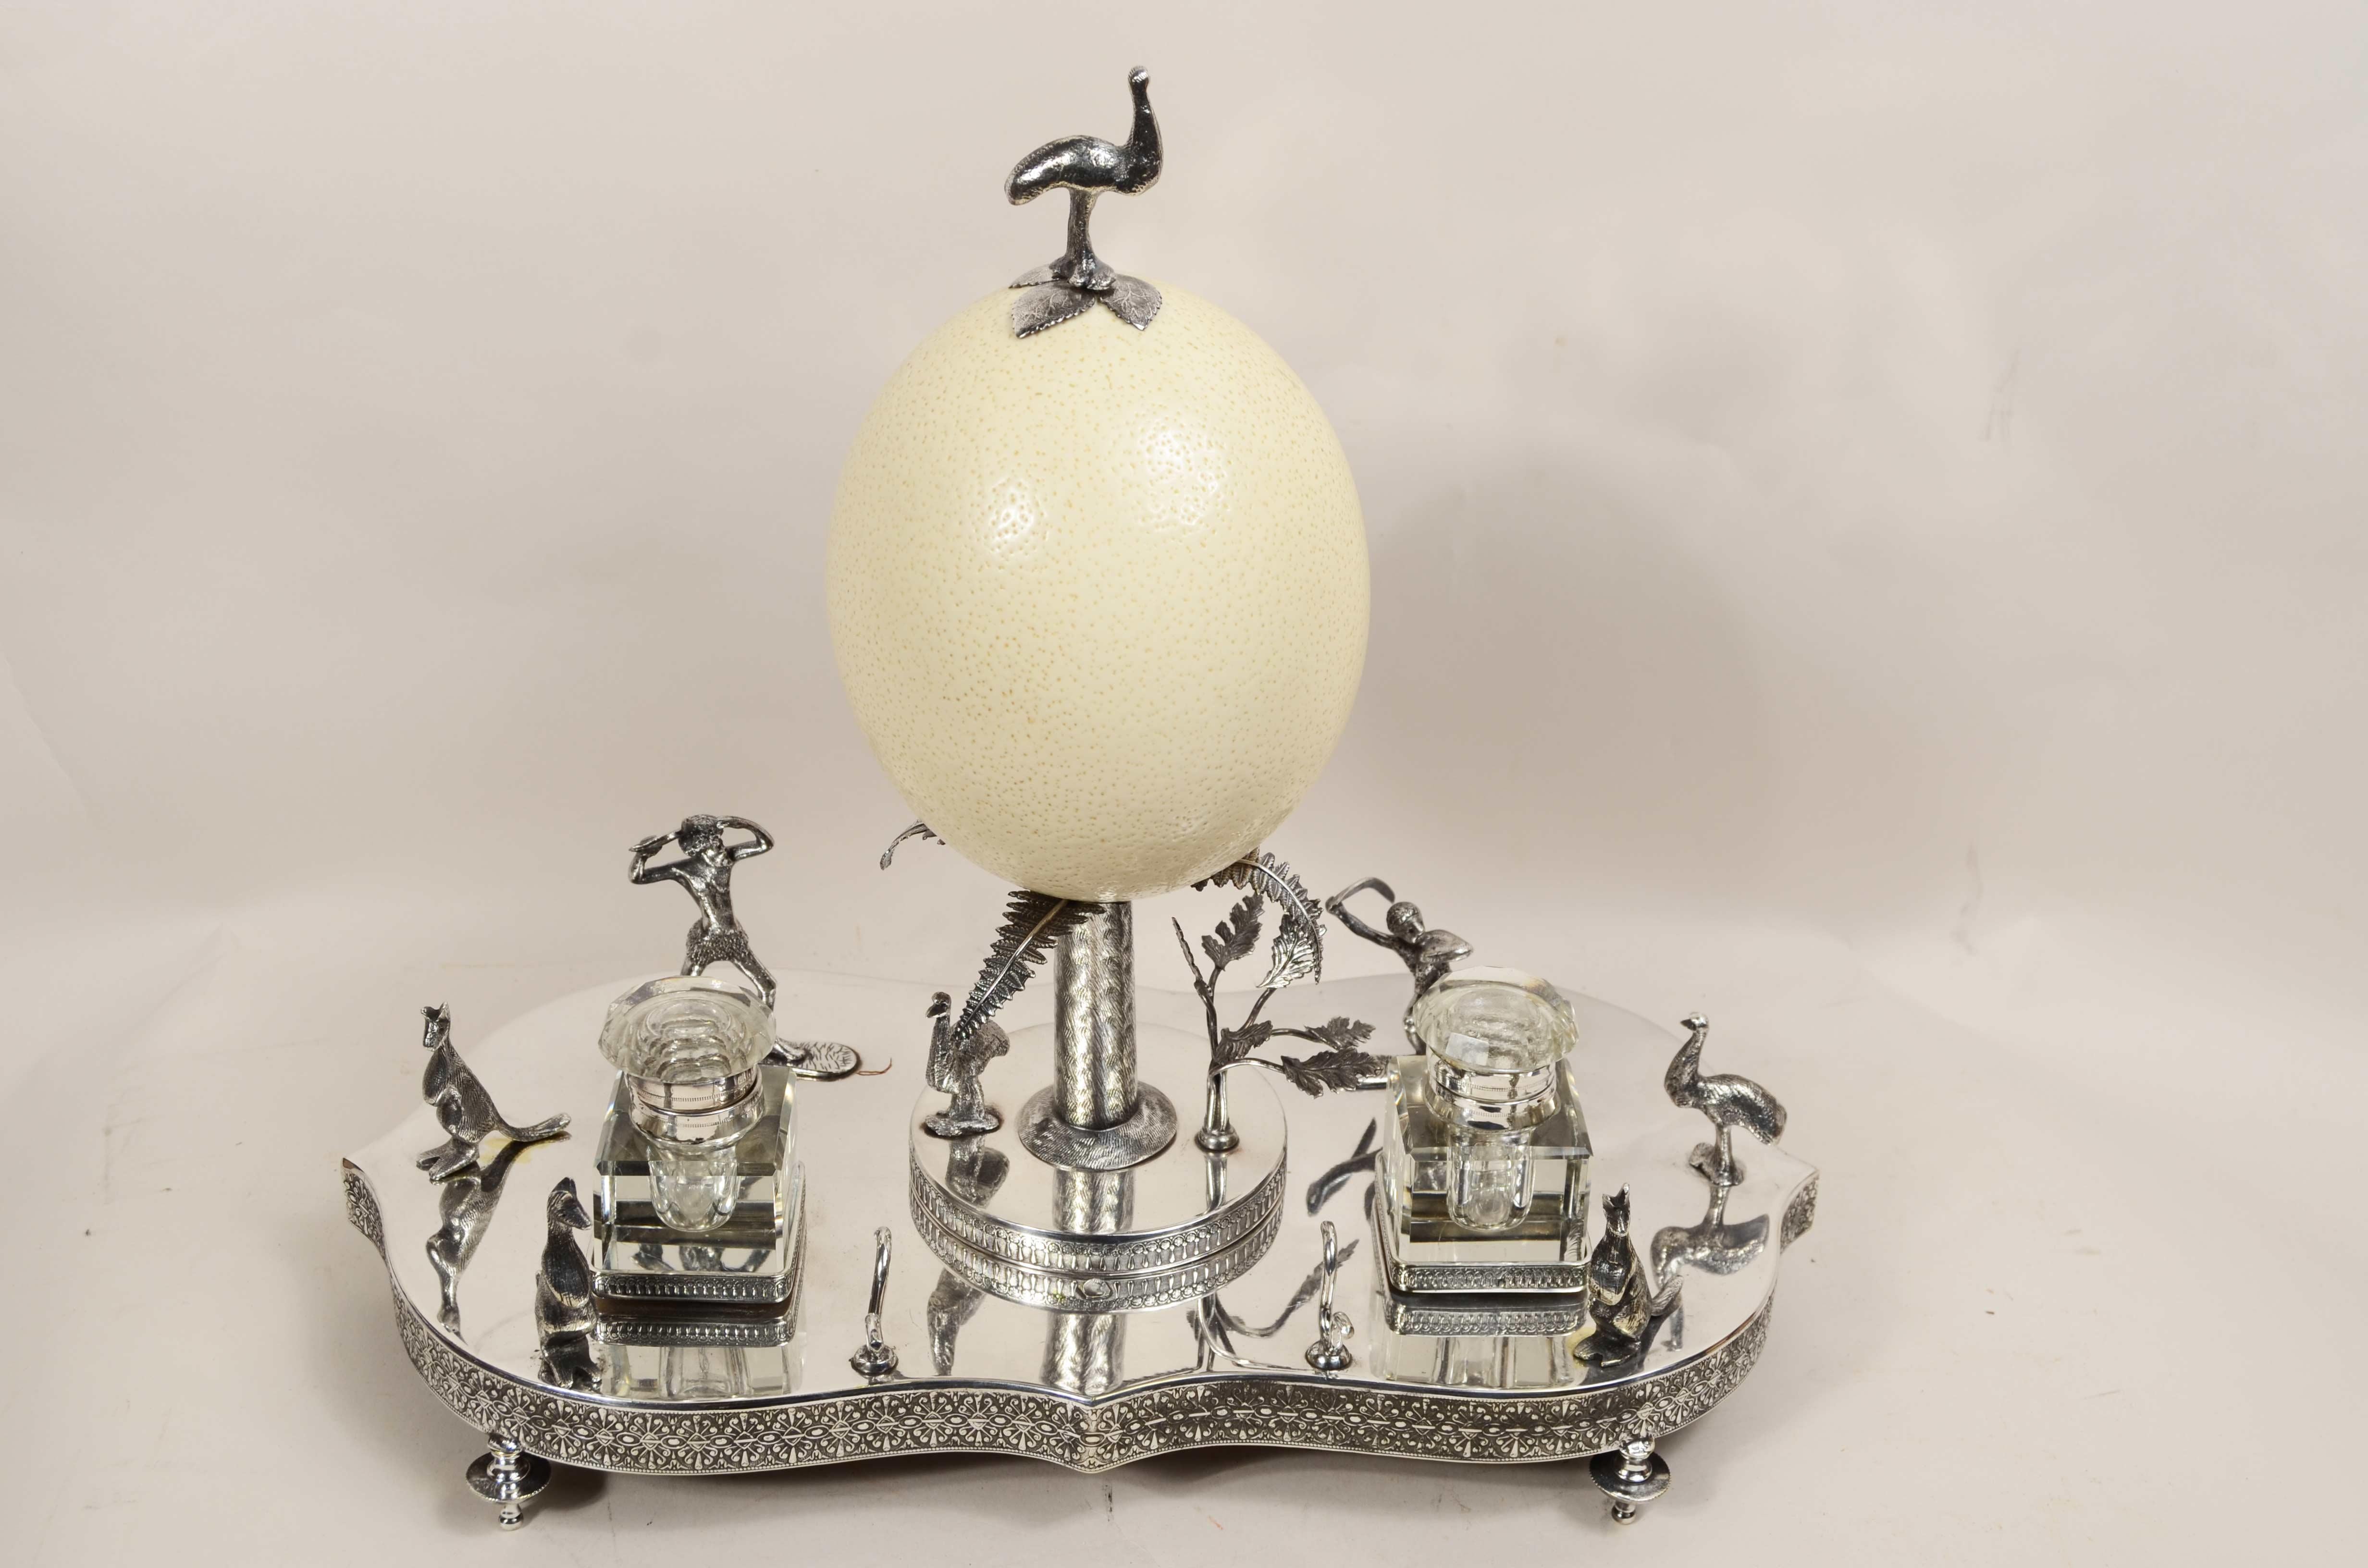 Victorian-era silver plate wunderkammer inkwell that  presents  in the center of the tray a palm tree from the  cut trunk on which rests reclining on four palm leaves an Australian emu egg surmounted in turn by a silver-plated metal casting emu. On